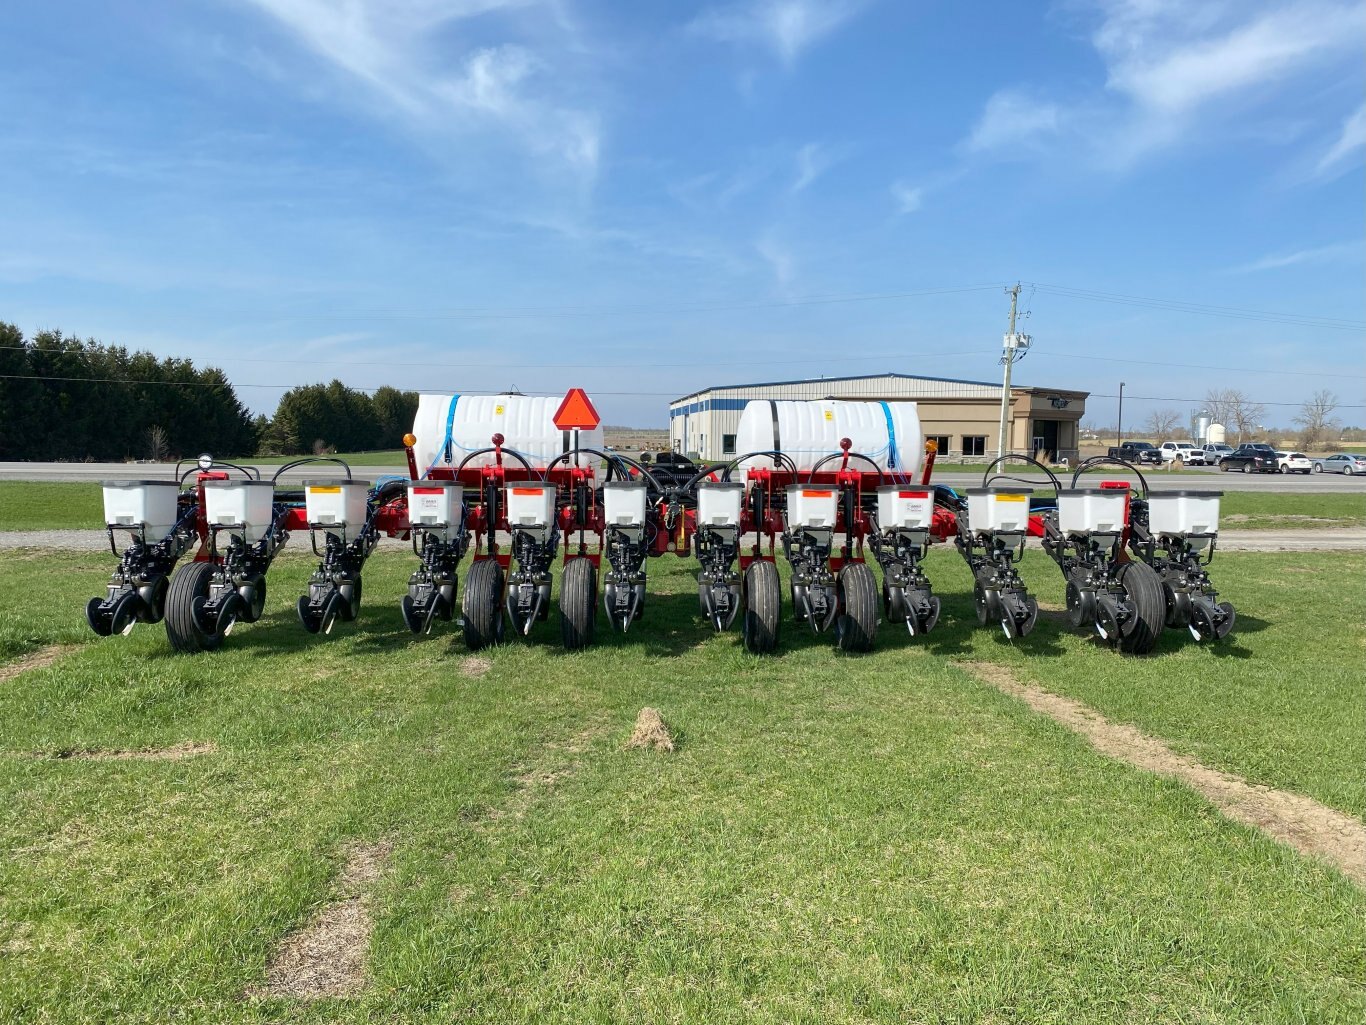 Massey Ferguson 12 Row VW Series 1230 VE Wing Fold Planter with Row Marker and Residue Cleaner